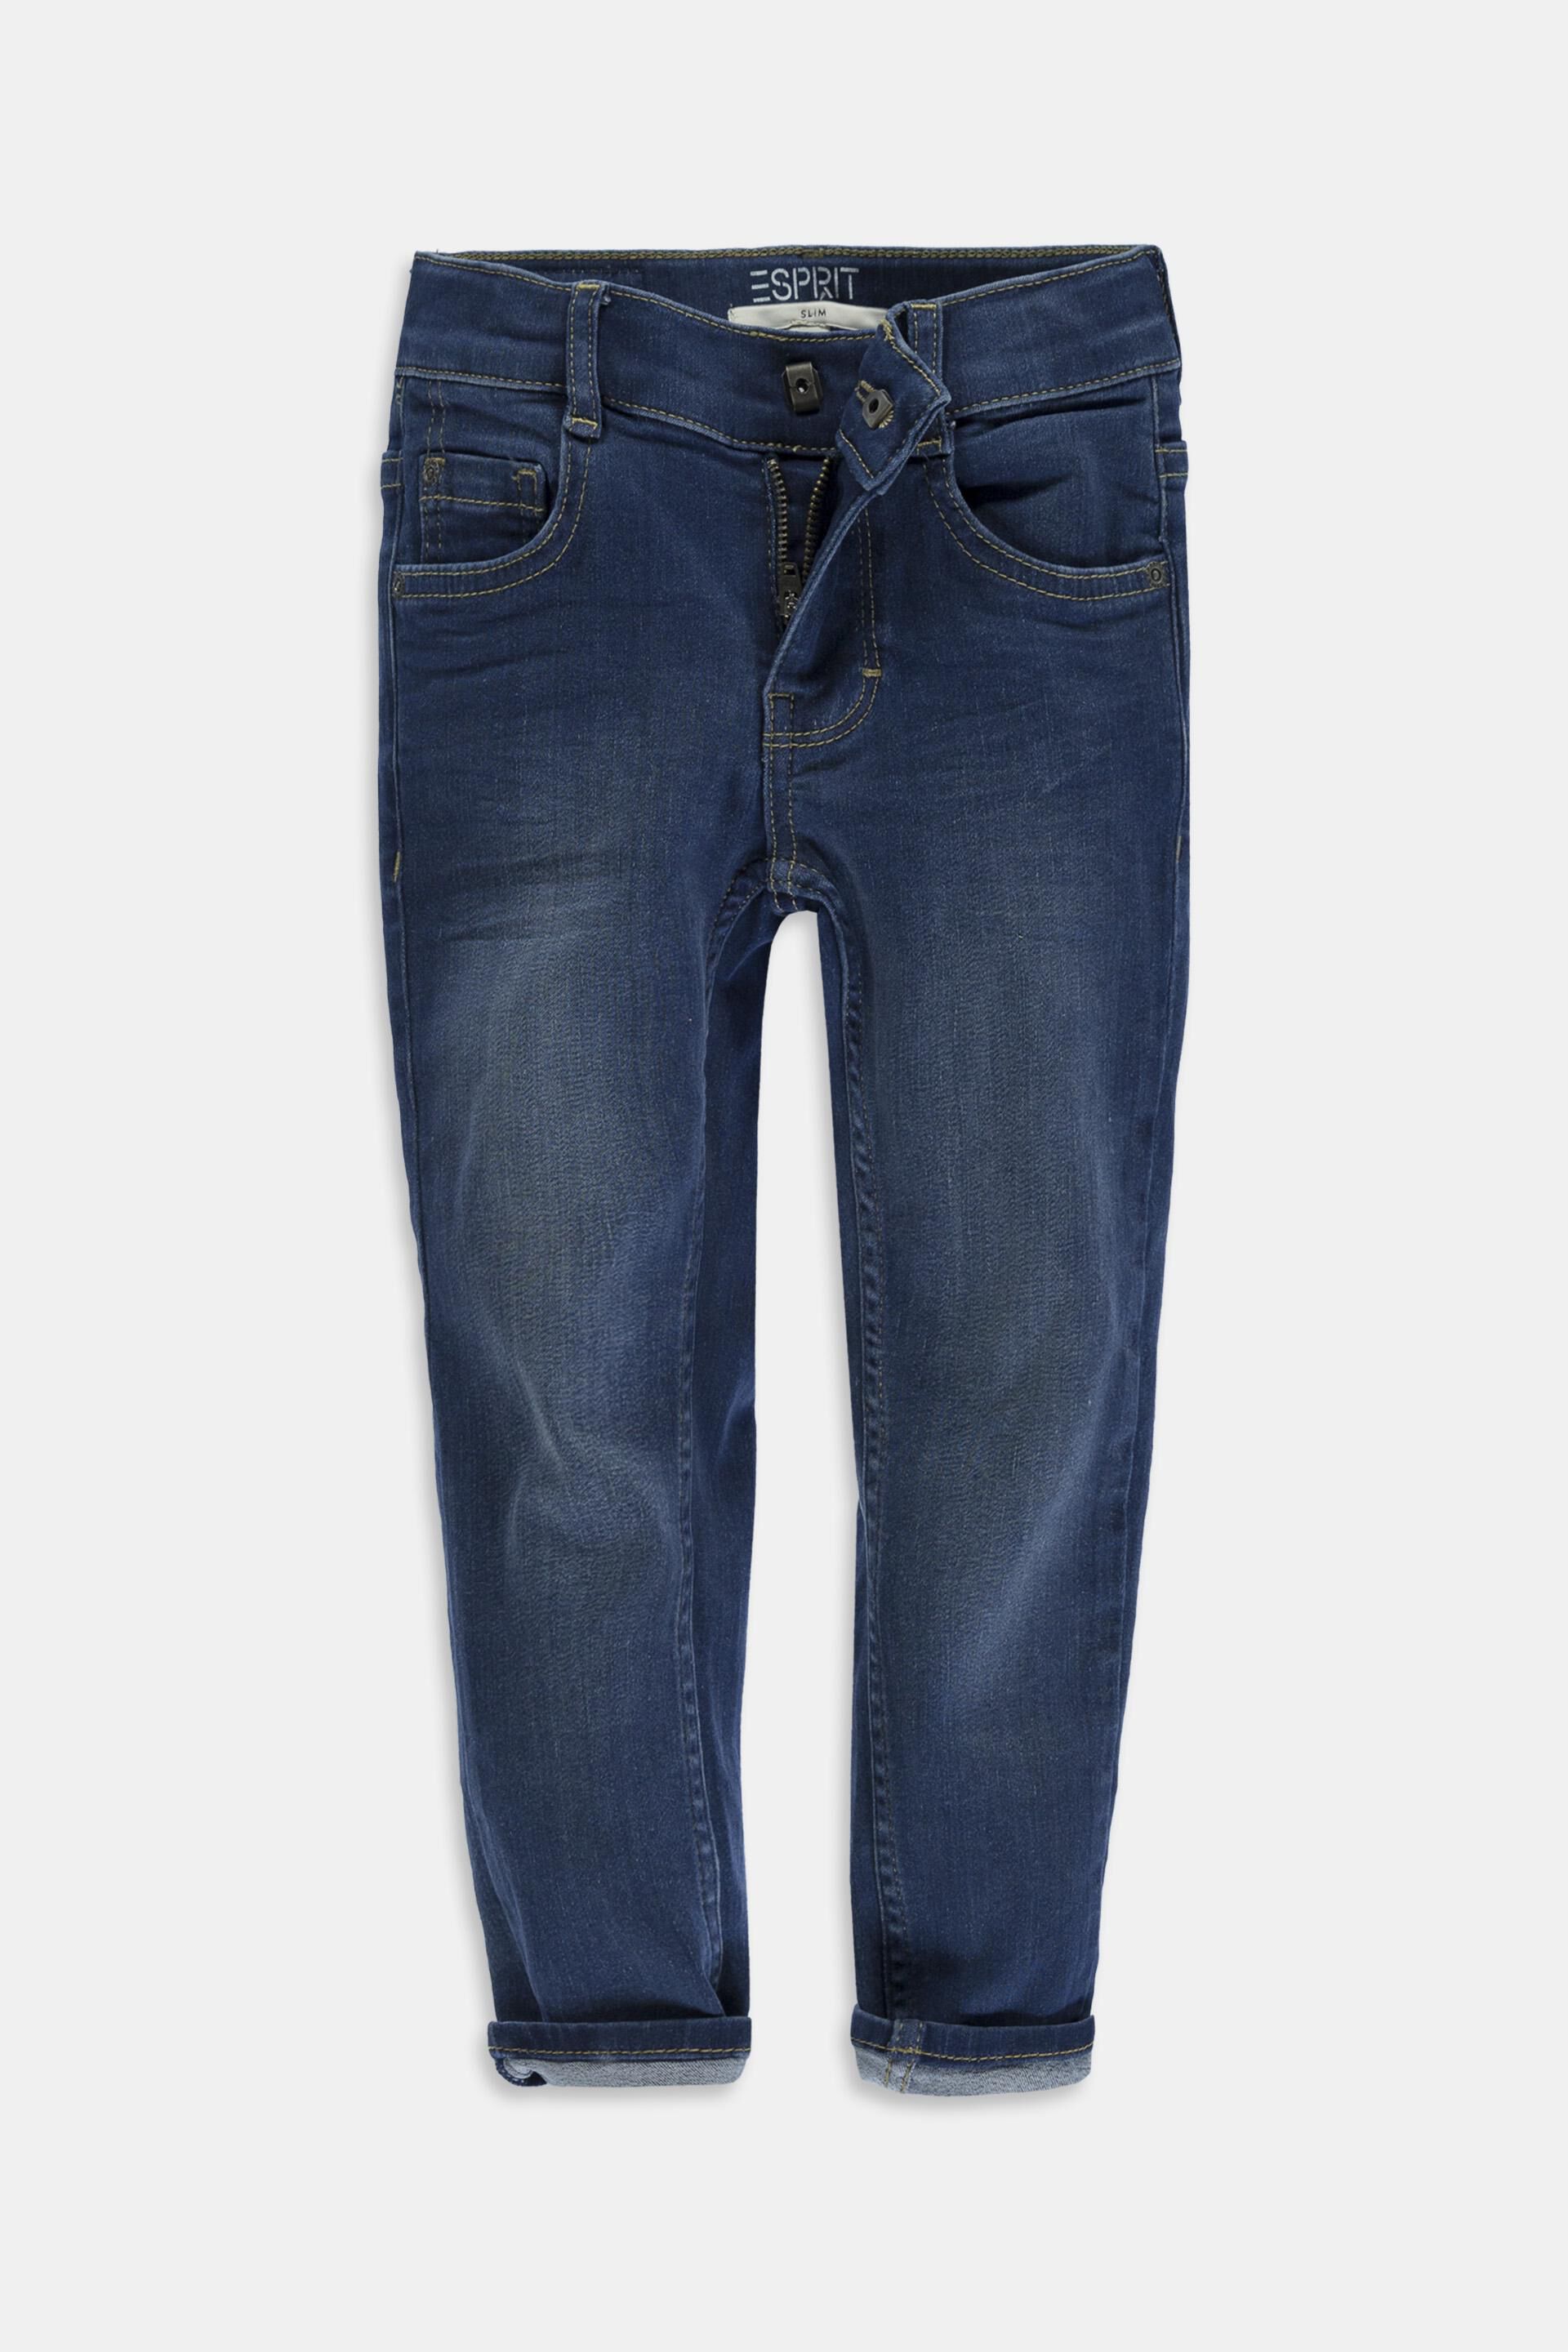 Esprit jeans Stretch adjustable with widths different waistband available in an